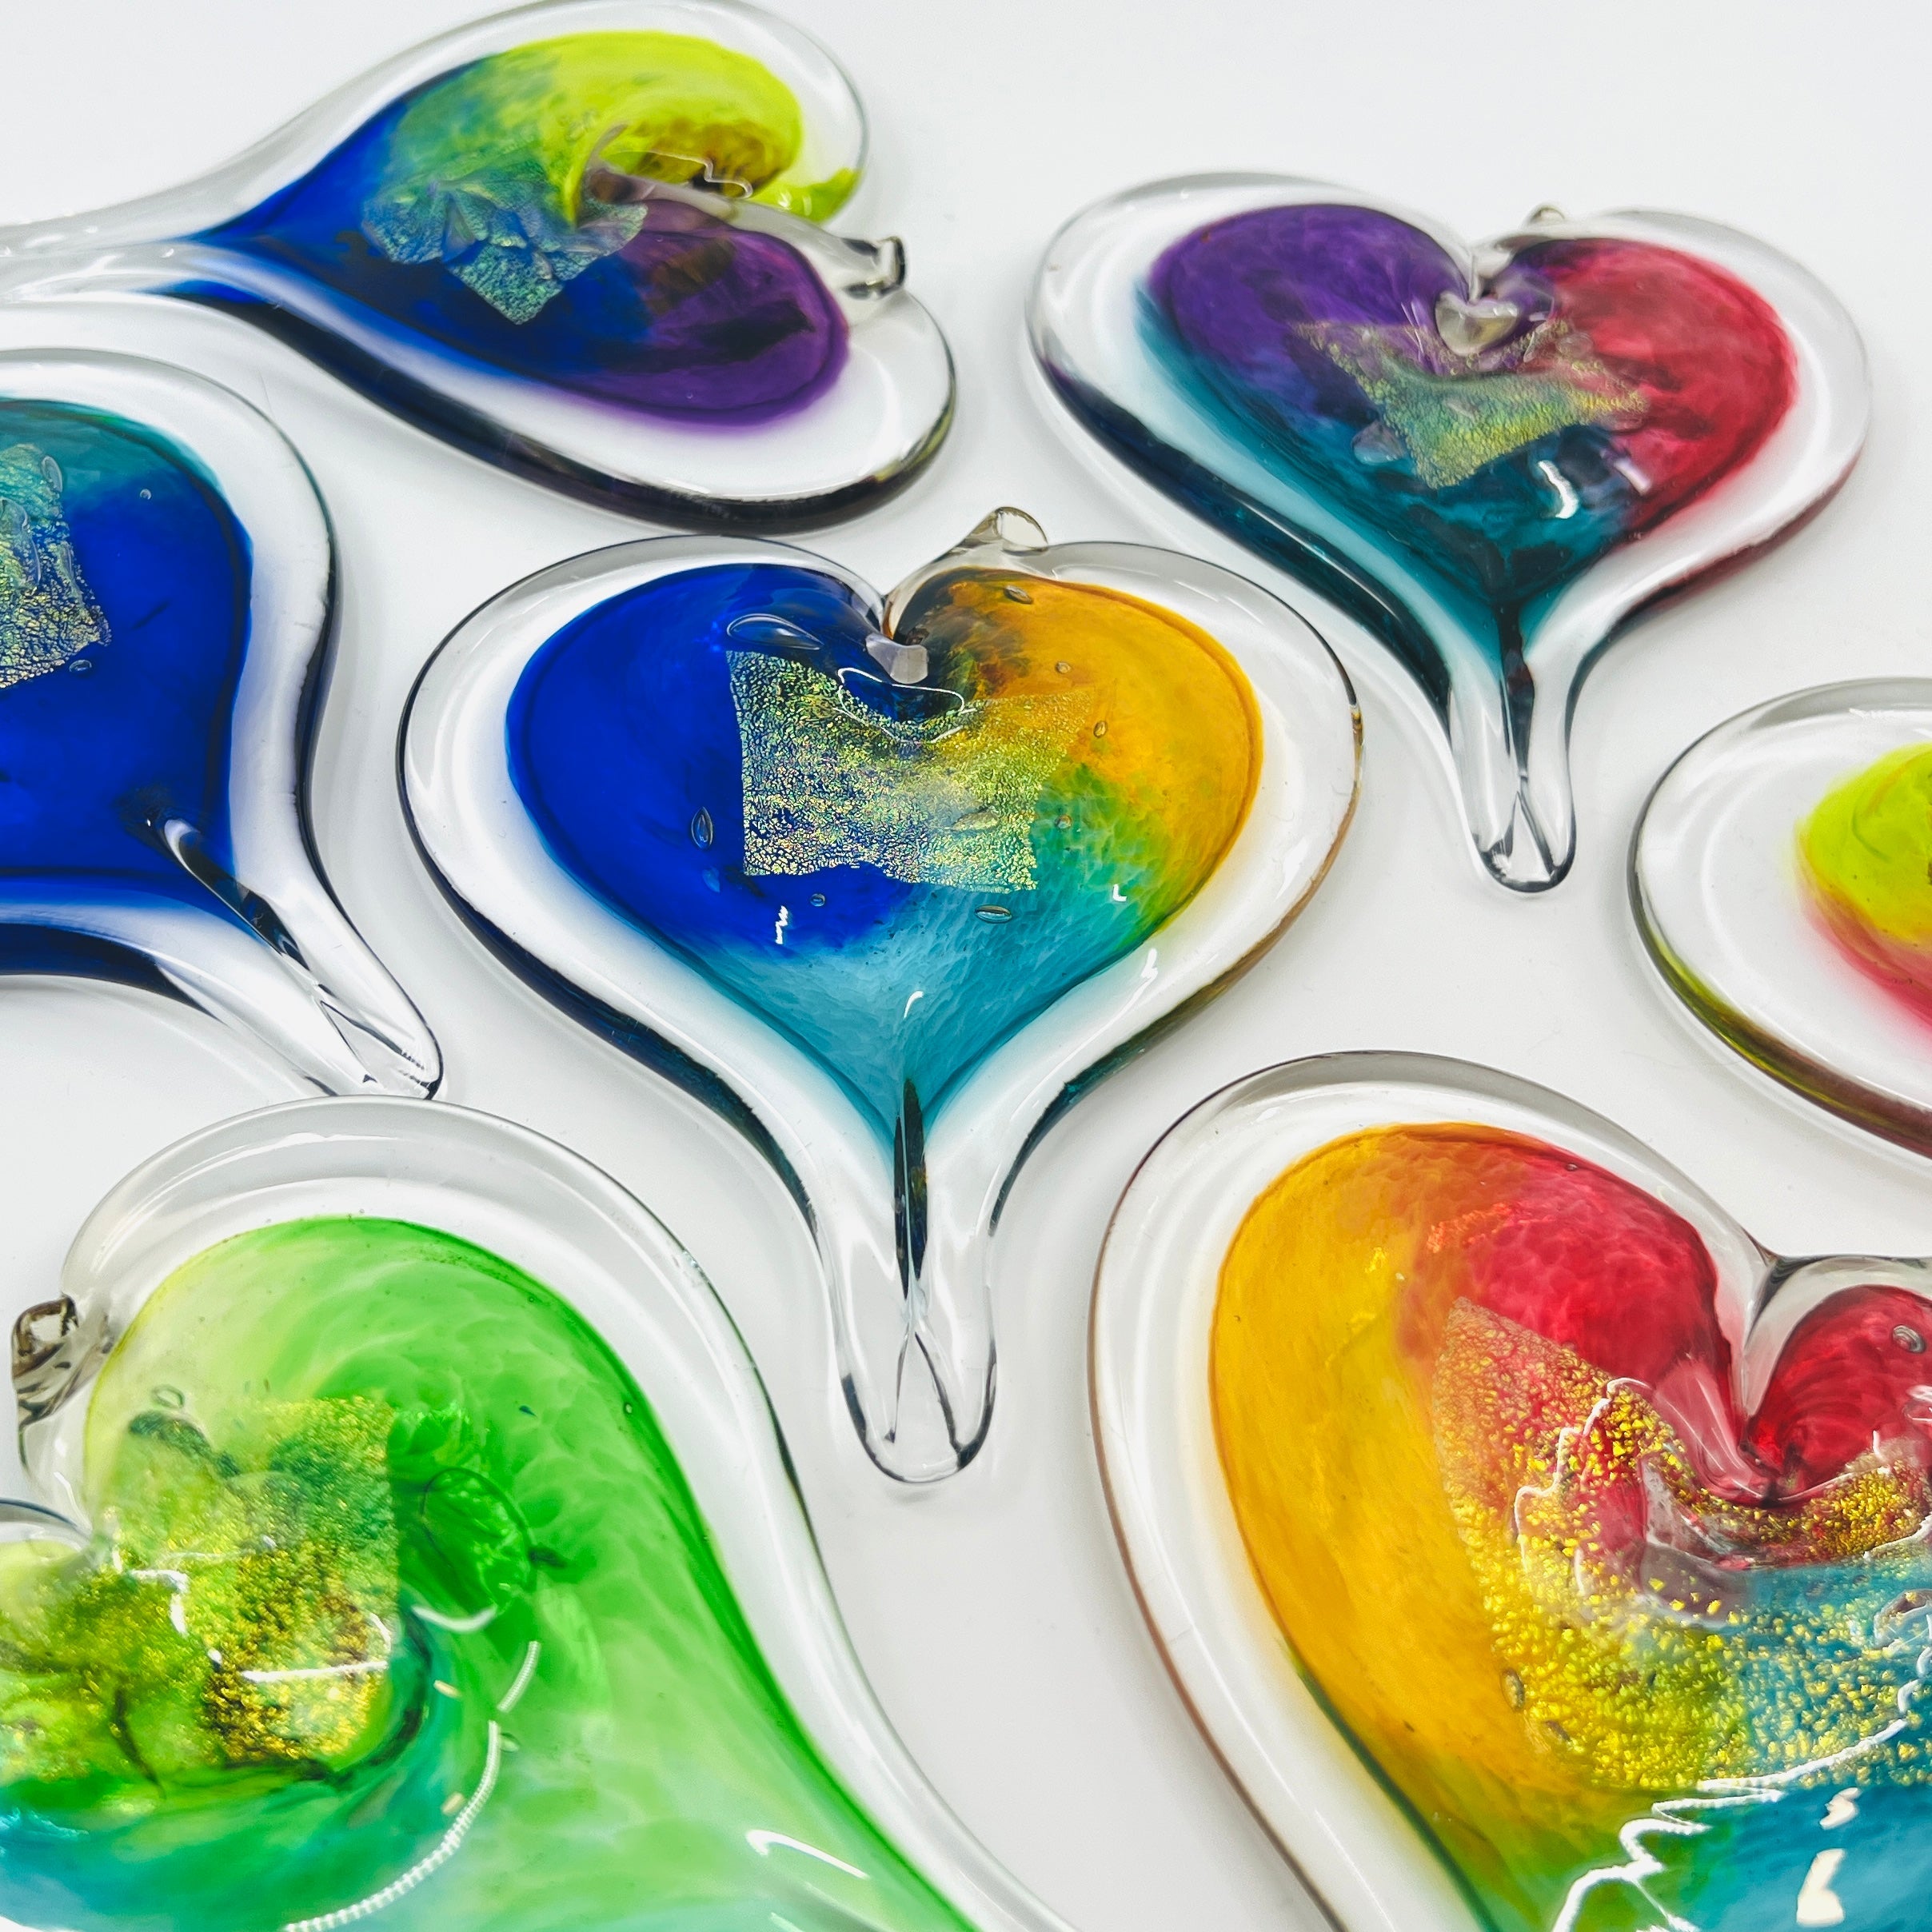 HAND SCULPTED GLASS HEARTS